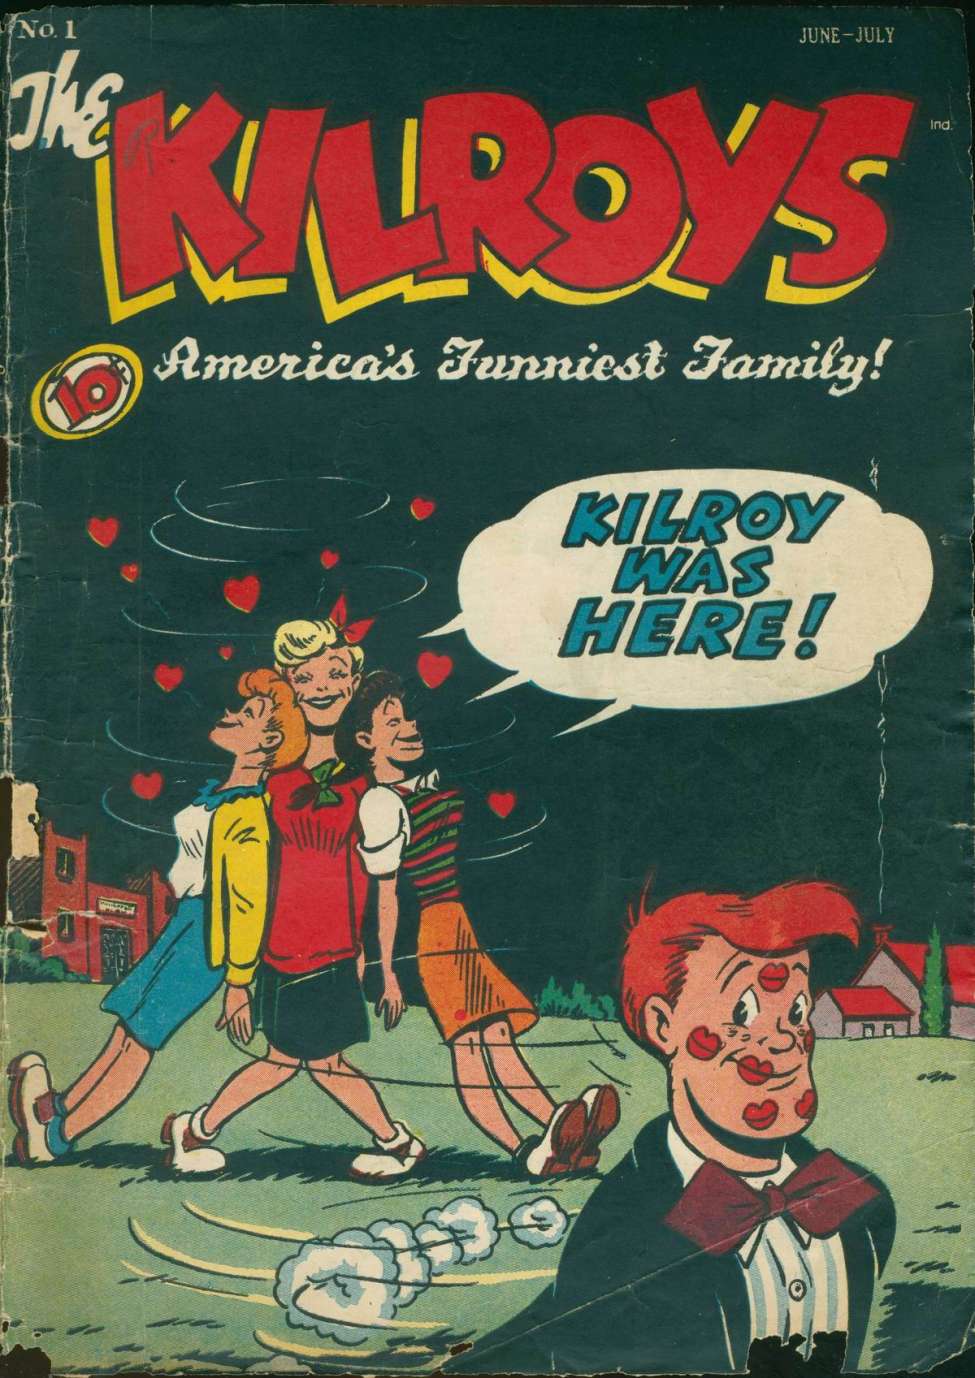 Comic Book Cover For The Kilroys 1